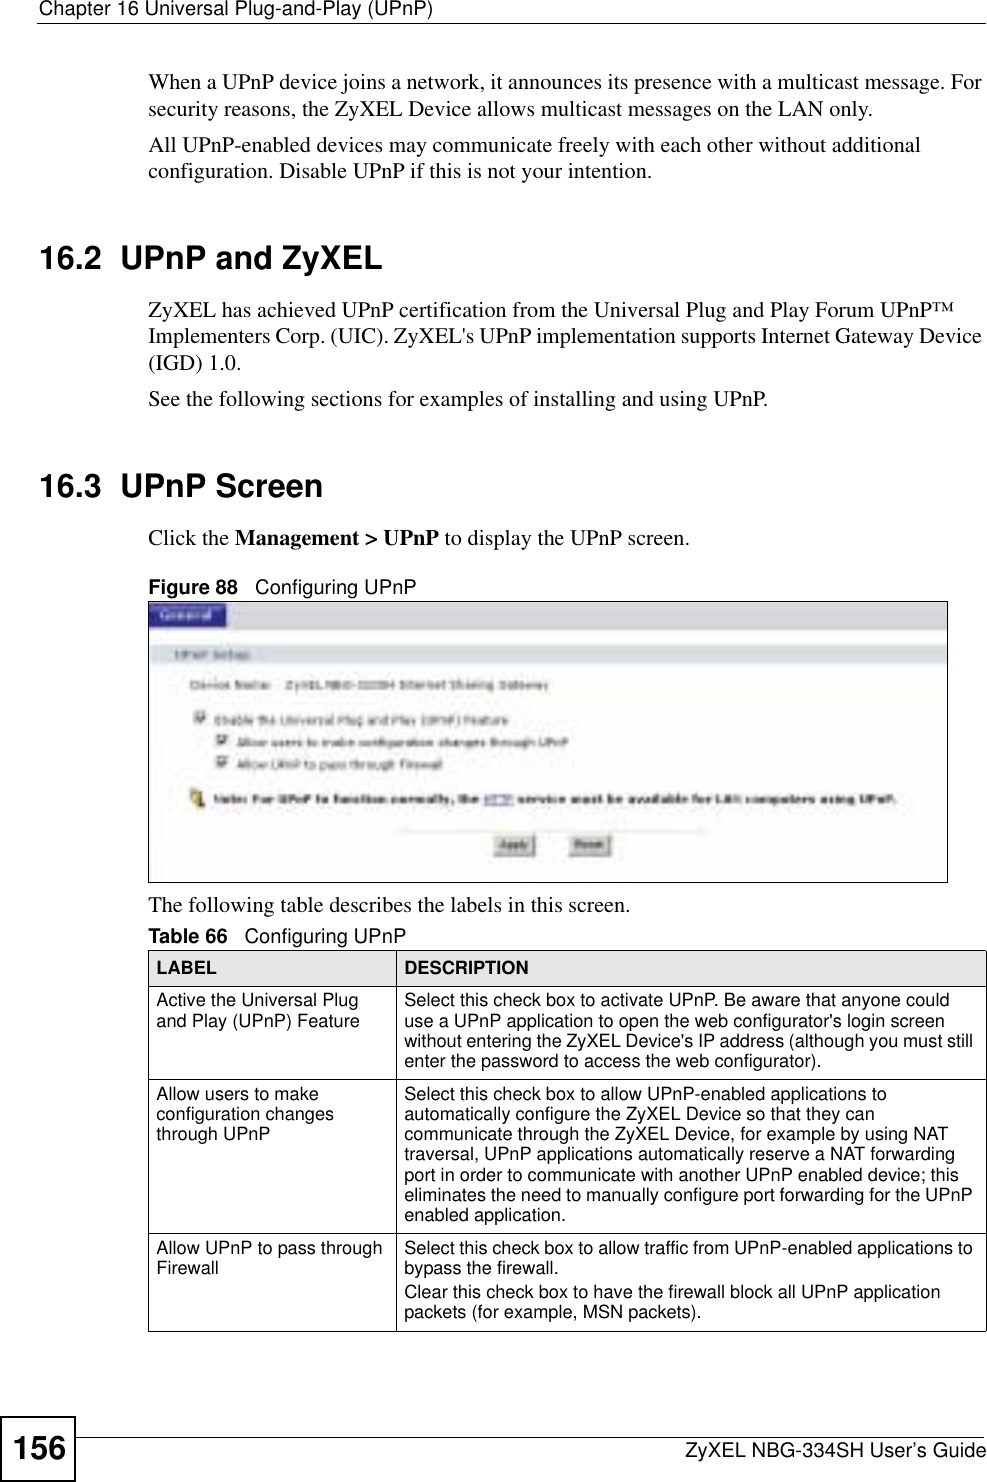 Chapter 16 Universal Plug-and-Play (UPnP)ZyXEL NBG-334SH User’s Guide156When a UPnP device joins a network, it announces its presence with a multicast message. For security reasons, the ZyXEL Device allows multicast messages on the LAN only.All UPnP-enabled devices may communicate freely with each other without additional configuration. Disable UPnP if this is not your intention. 16.2  UPnP and ZyXELZyXEL has achieved UPnP certification from the Universal Plug and Play Forum UPnP™ Implementers Corp. (UIC). ZyXEL&apos;s UPnP implementation supports Internet Gateway Device (IGD) 1.0. See the following sections for examples of installing and using UPnP.16.3  UPnP ScreenClick the Management &gt; UPnP to display the UPnP screen.Figure 88   Configuring UPnPThe following table describes the labels in this screen. Table 66   Configuring UPnPLABEL DESCRIPTIONActive the Universal Plug and Play (UPnP) Feature Select this check box to activate UPnP. Be aware that anyone could use a UPnP application to open the web configurator&apos;s login screen without entering the ZyXEL Device&apos;s IP address (although you must still enter the password to access the web configurator).Allow users to make configuration changes through UPnPSelect this check box to allow UPnP-enabled applications to automatically configure the ZyXEL Device so that they can communicate through the ZyXEL Device, for example by using NAT traversal, UPnP applications automatically reserve a NAT forwarding port in order to communicate with another UPnP enabled device; this eliminates the need to manually configure port forwarding for the UPnP enabled application. Allow UPnP to pass through Firewall Select this check box to allow traffic from UPnP-enabled applications to bypass the firewall. Clear this check box to have the firewall block all UPnP application packets (for example, MSN packets).